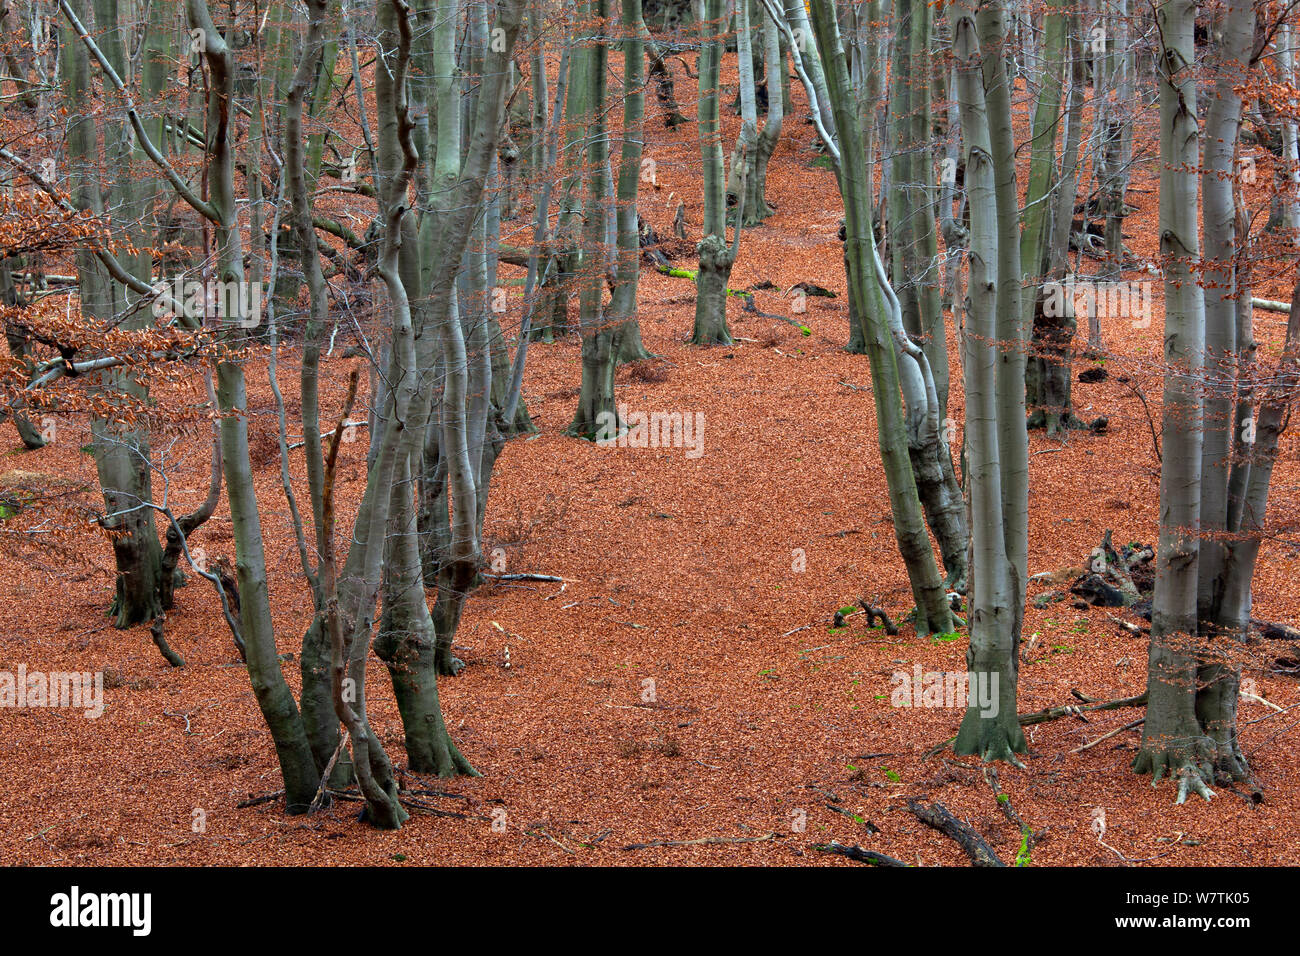 Common beech trees (Fagus sylvatica), Epping Forest, Essex, England, UK, December. Stock Photo